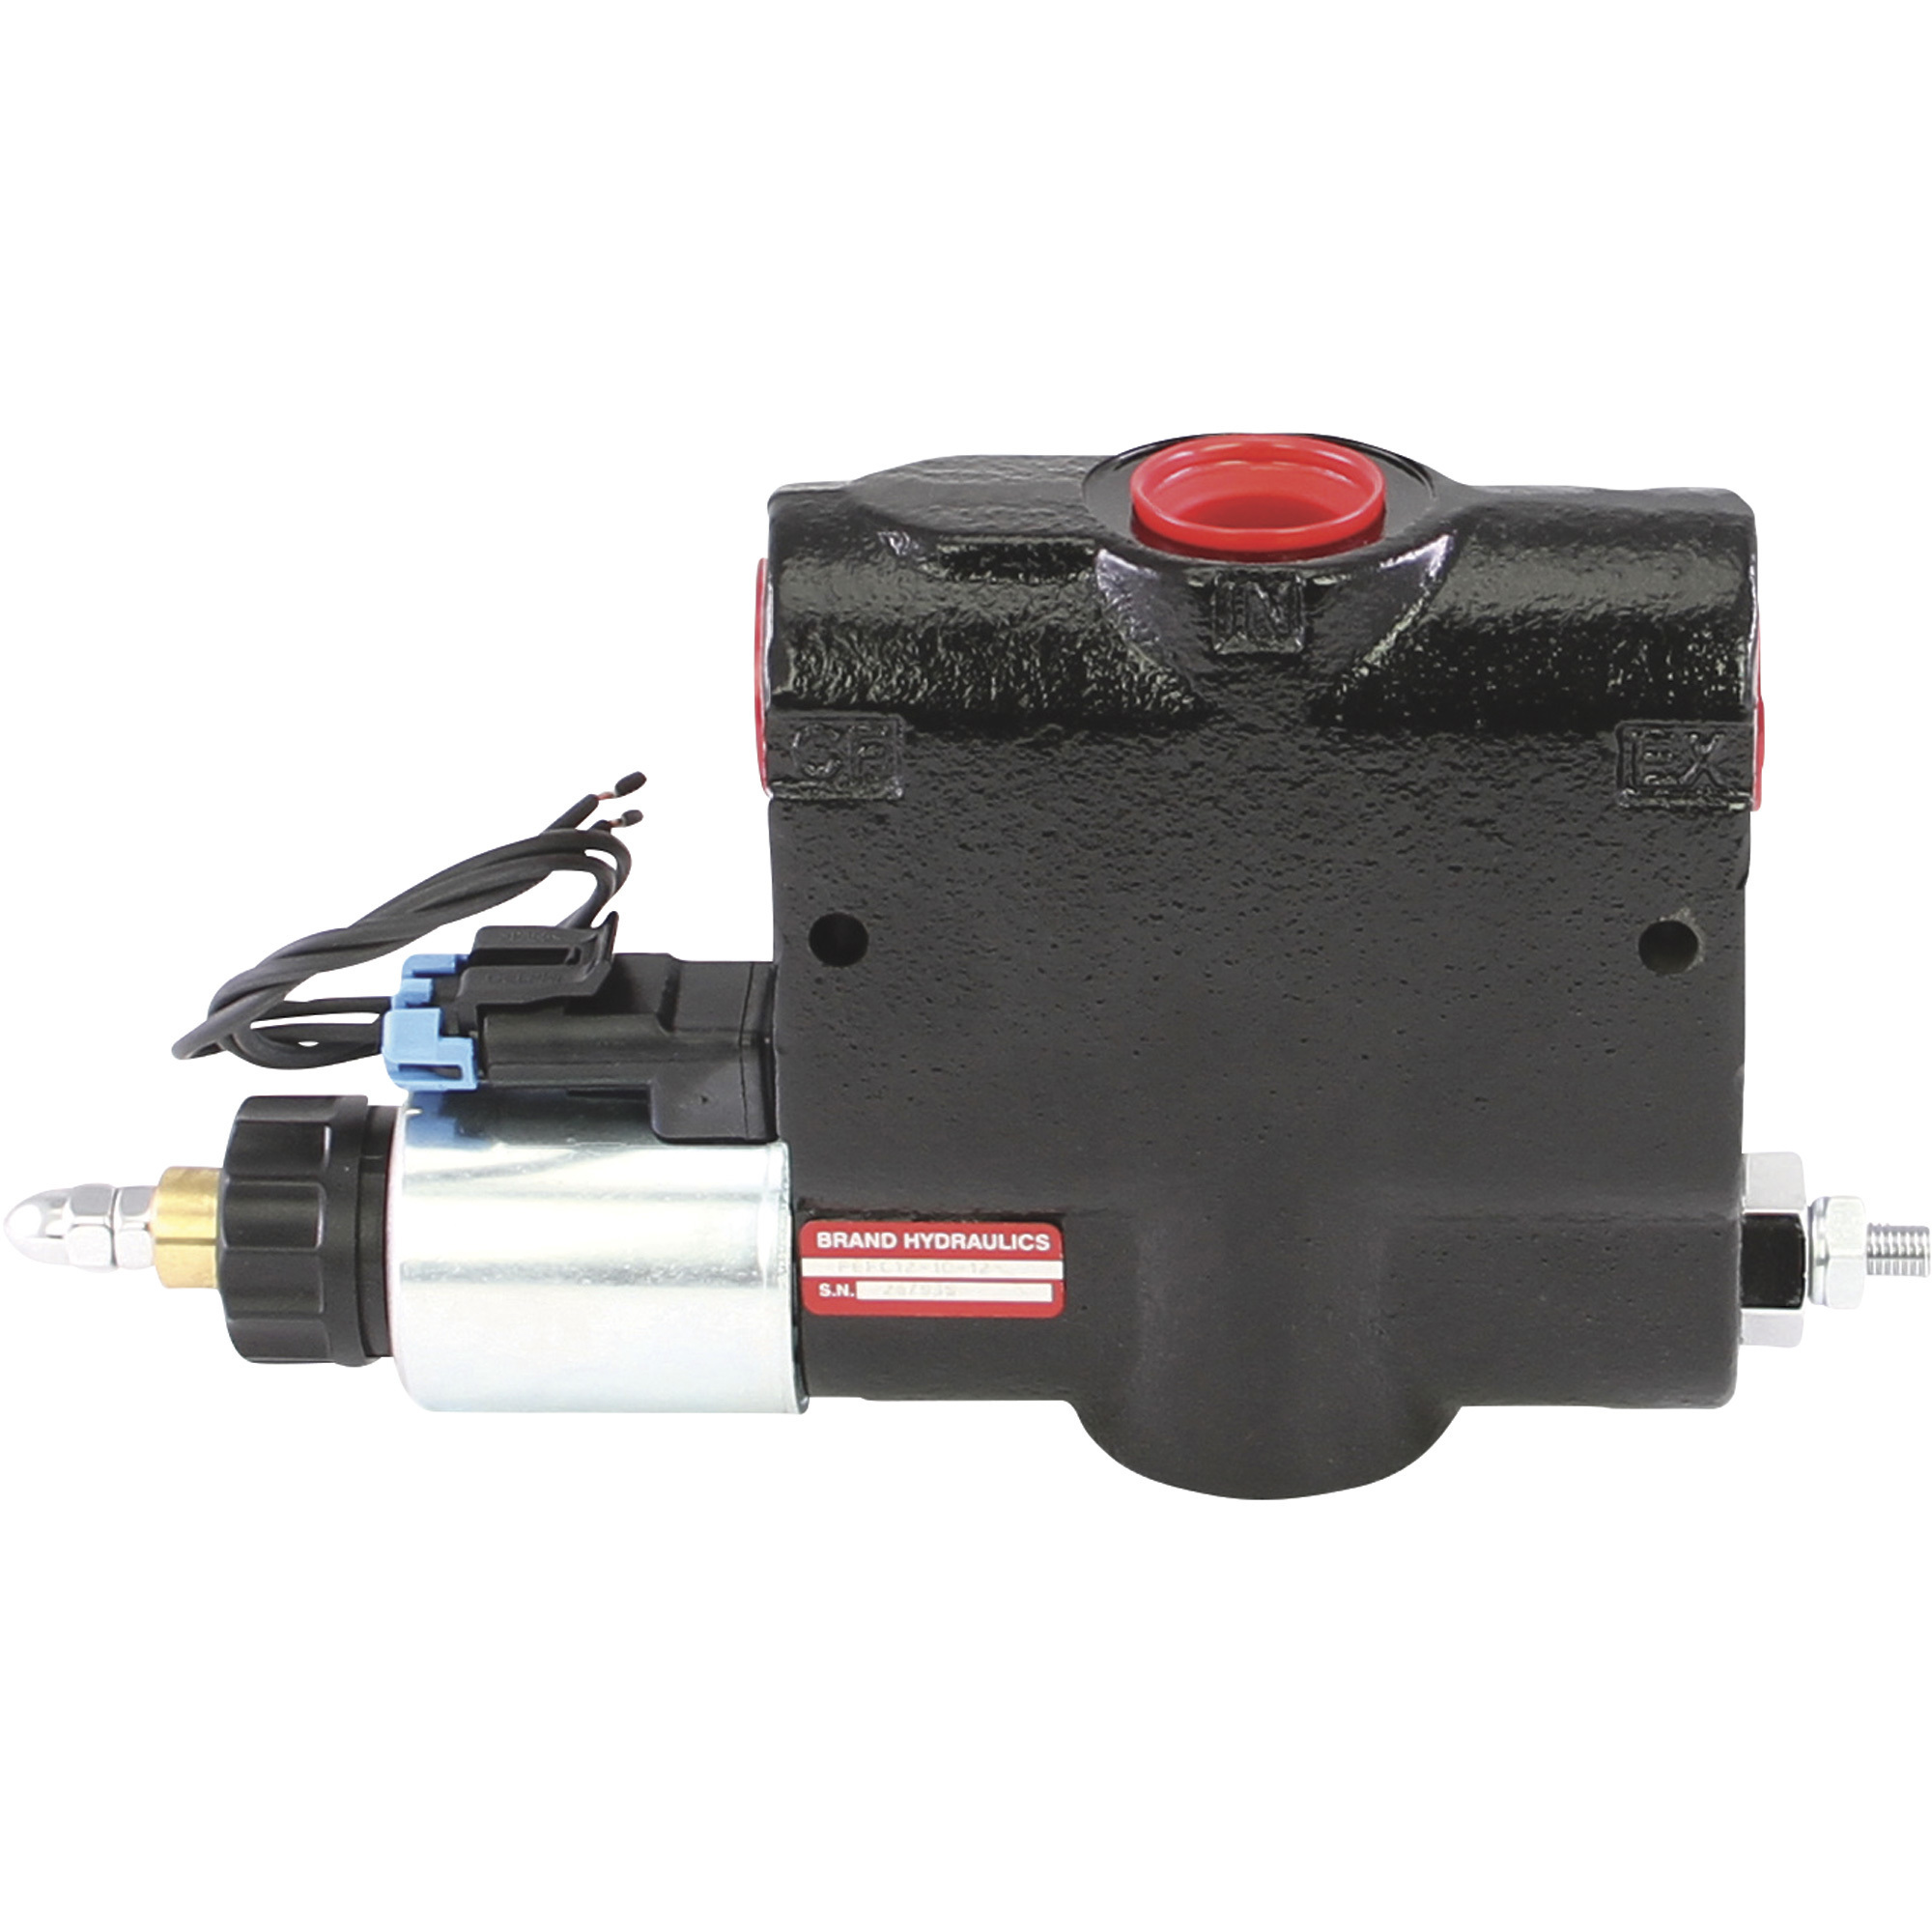 Brand Hydraulics Electronically Adjustable Flow Control Valve â 0â30 GPM, 3,000 PSI, Model PEFC12-30-12